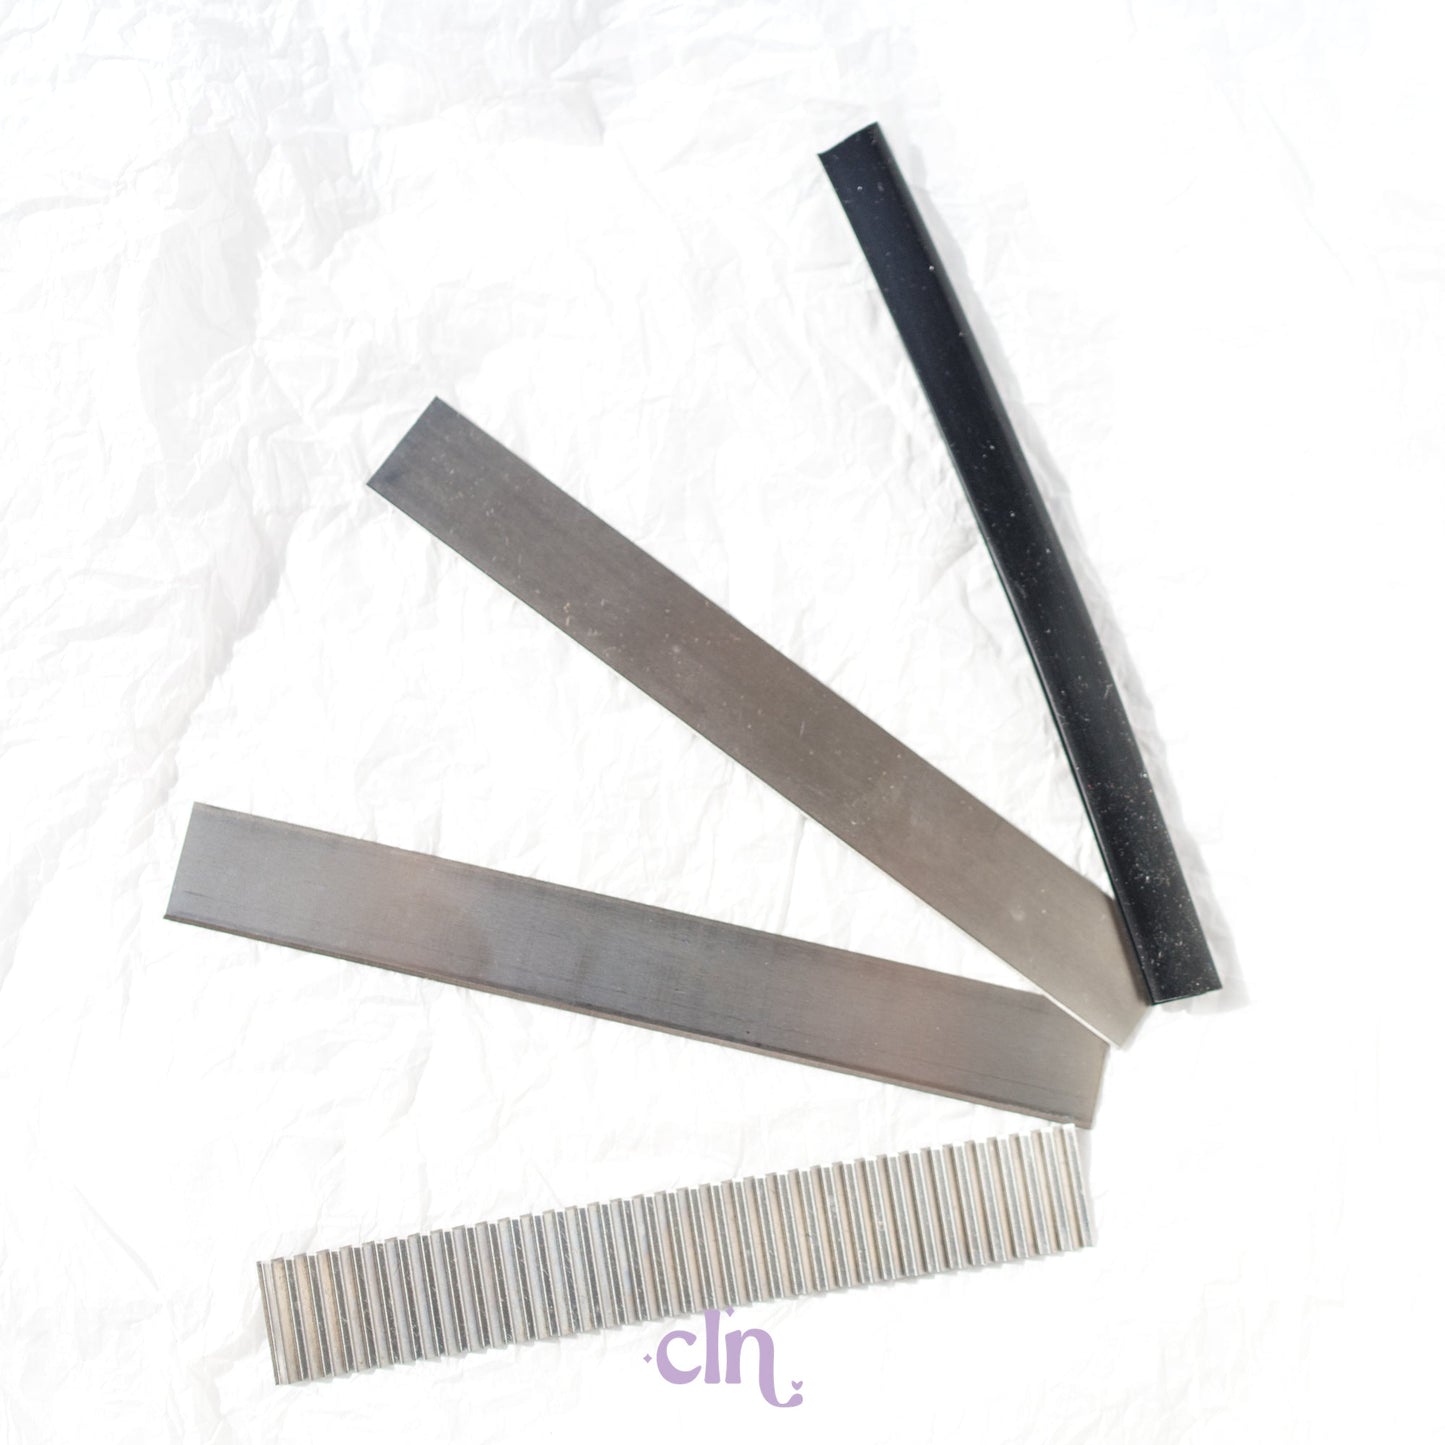 Set of 3 tissue blades - Curated tools - CLN Atelier